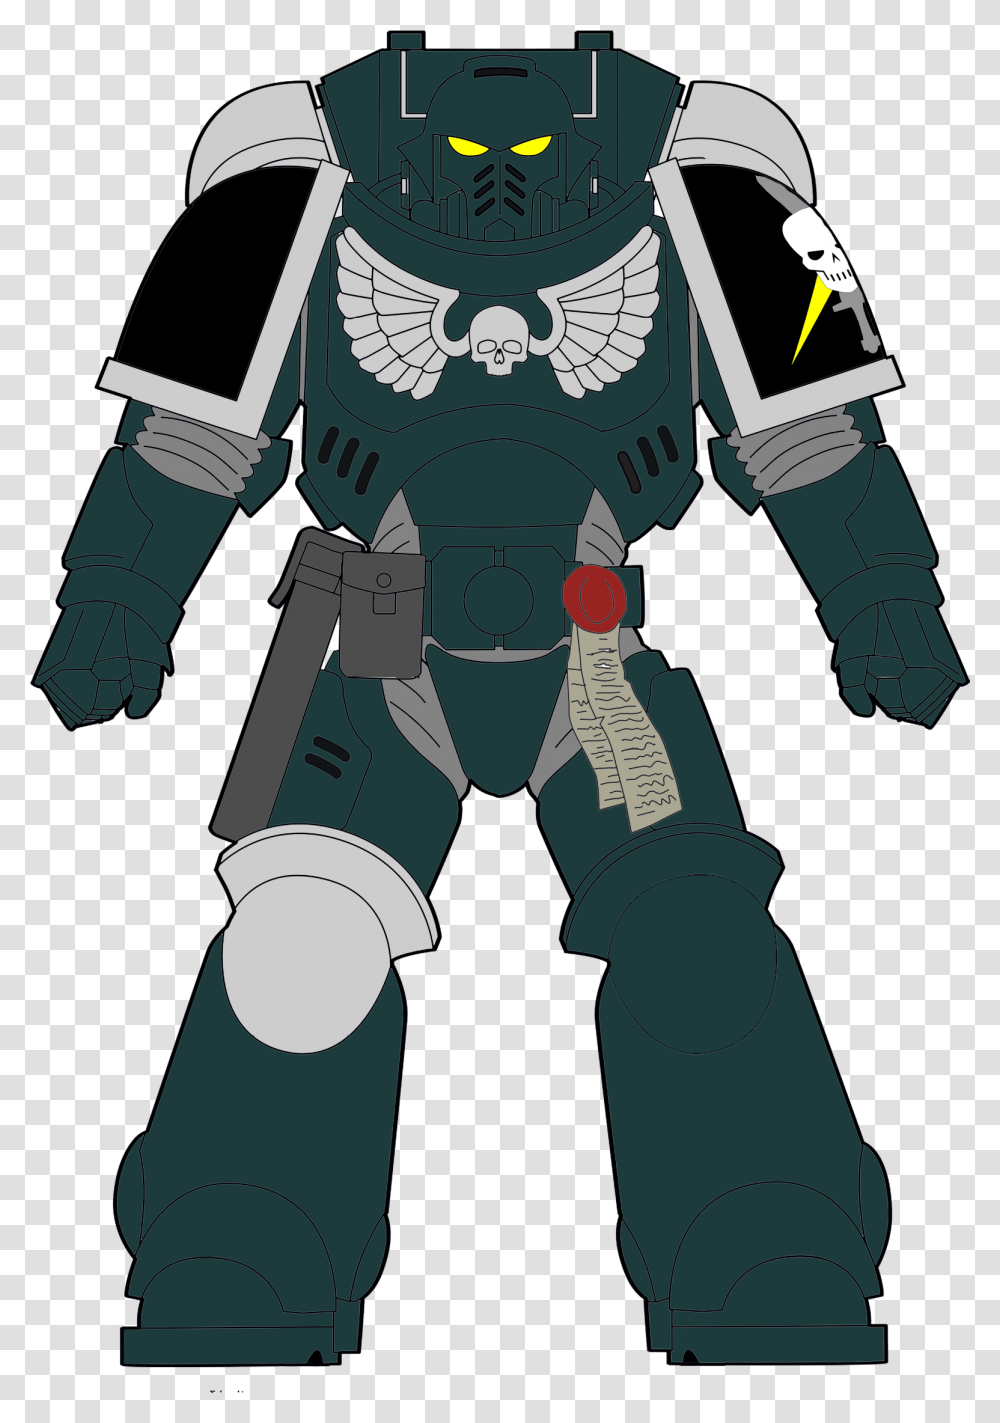 Warhammer Fanon Adeptus Astartes Markings And Heraldry, Knight, Armor, Costume Transparent Png